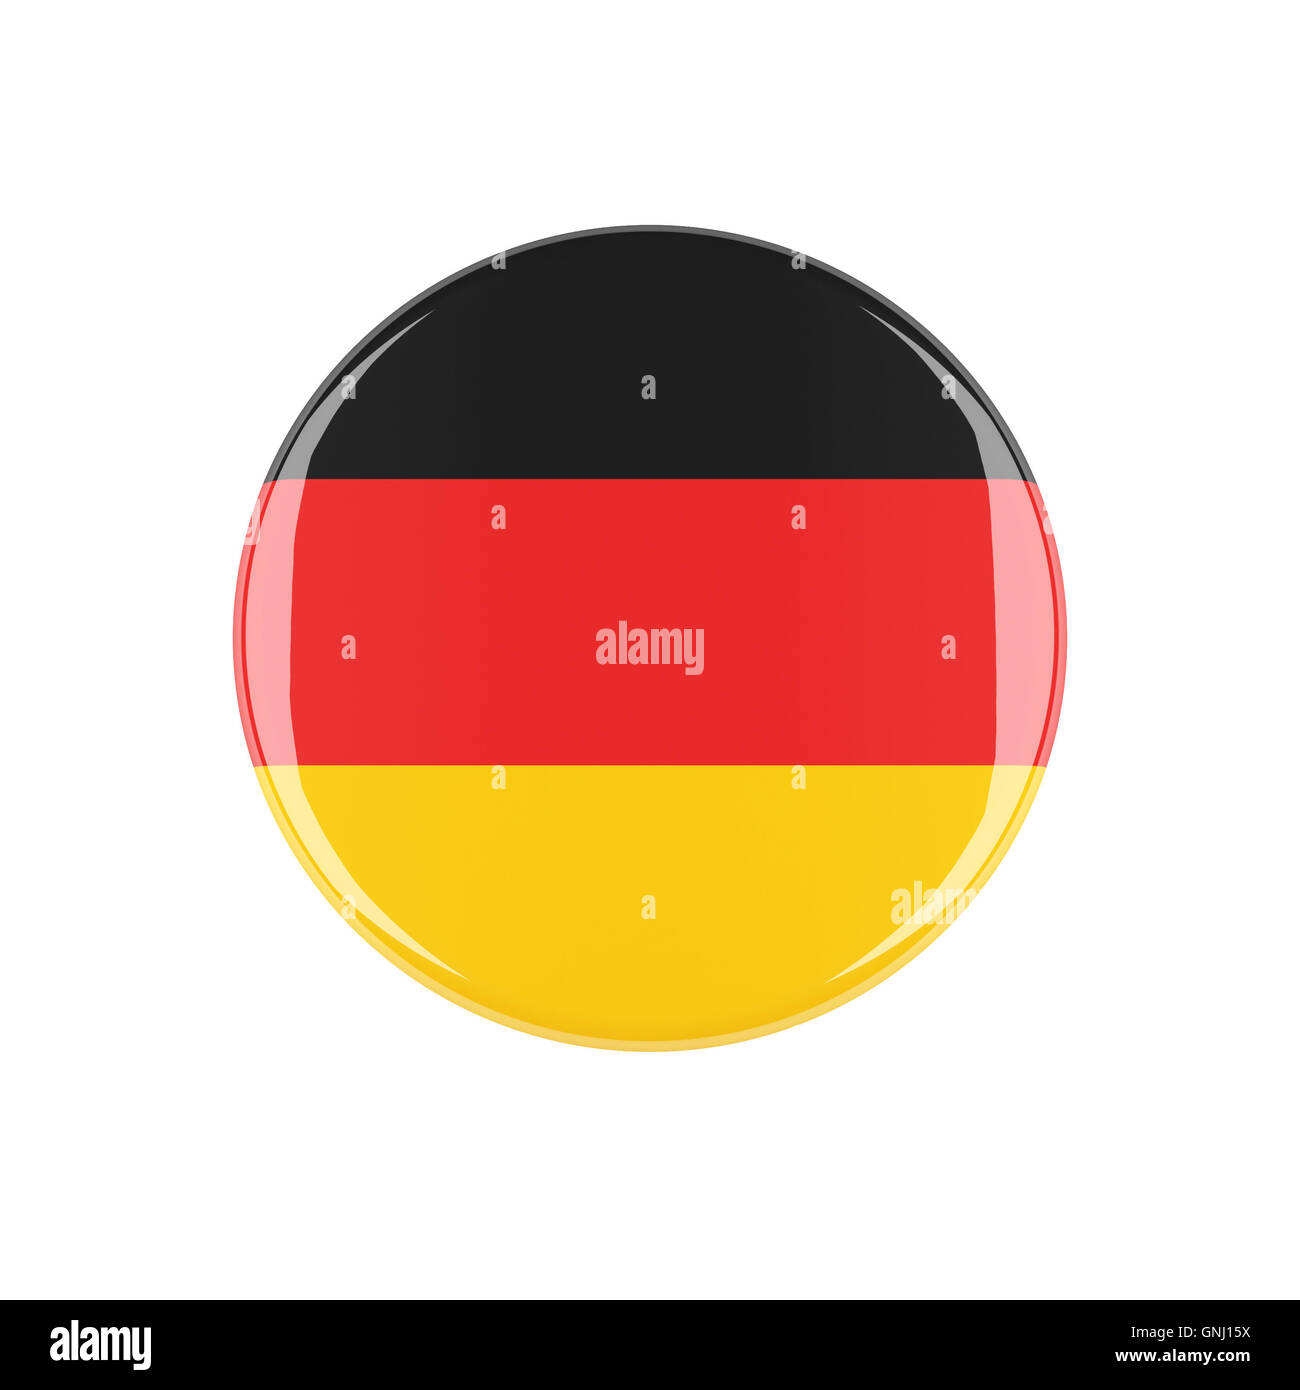 germany 3d button isolated on white background Stock Photo